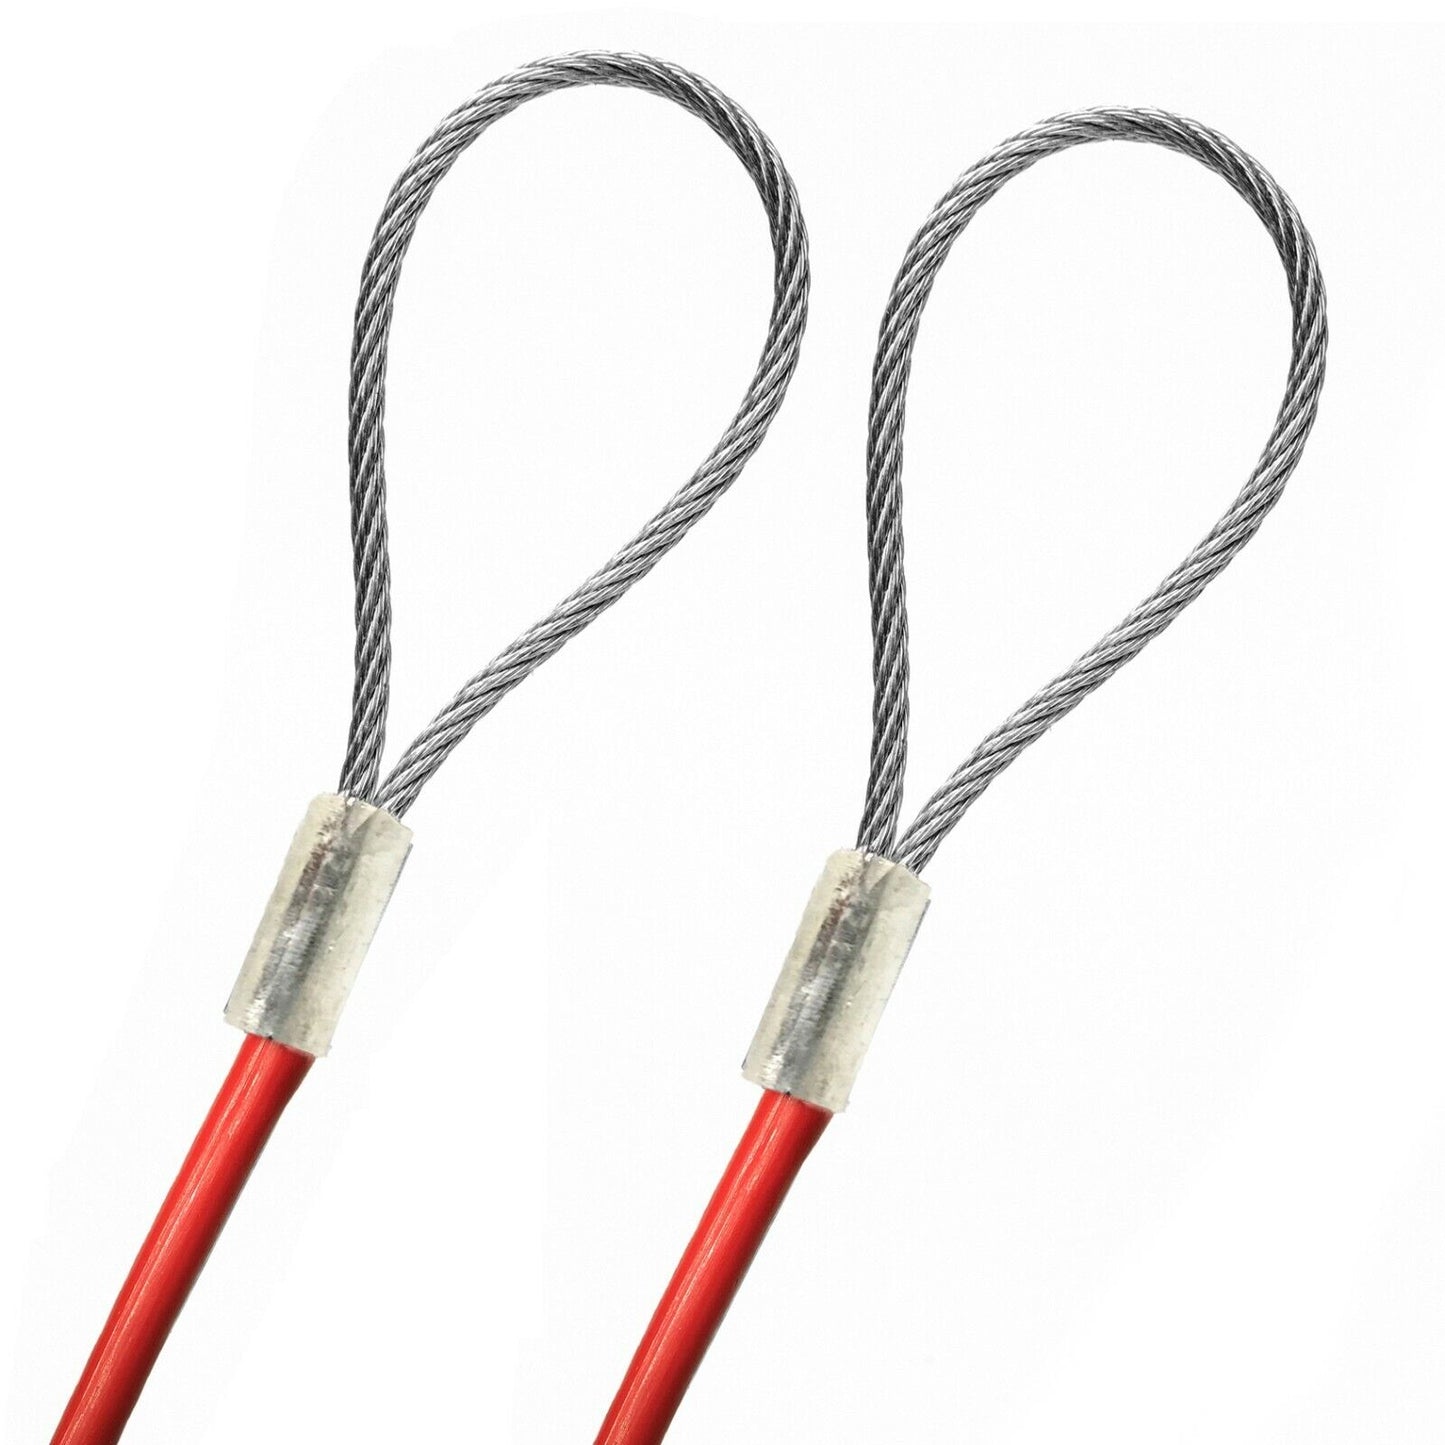 1-100 feet Order To Size 1/8 Galvanized Steel Cable RED Vinyl Coated To 1/16 Made To Order In USA